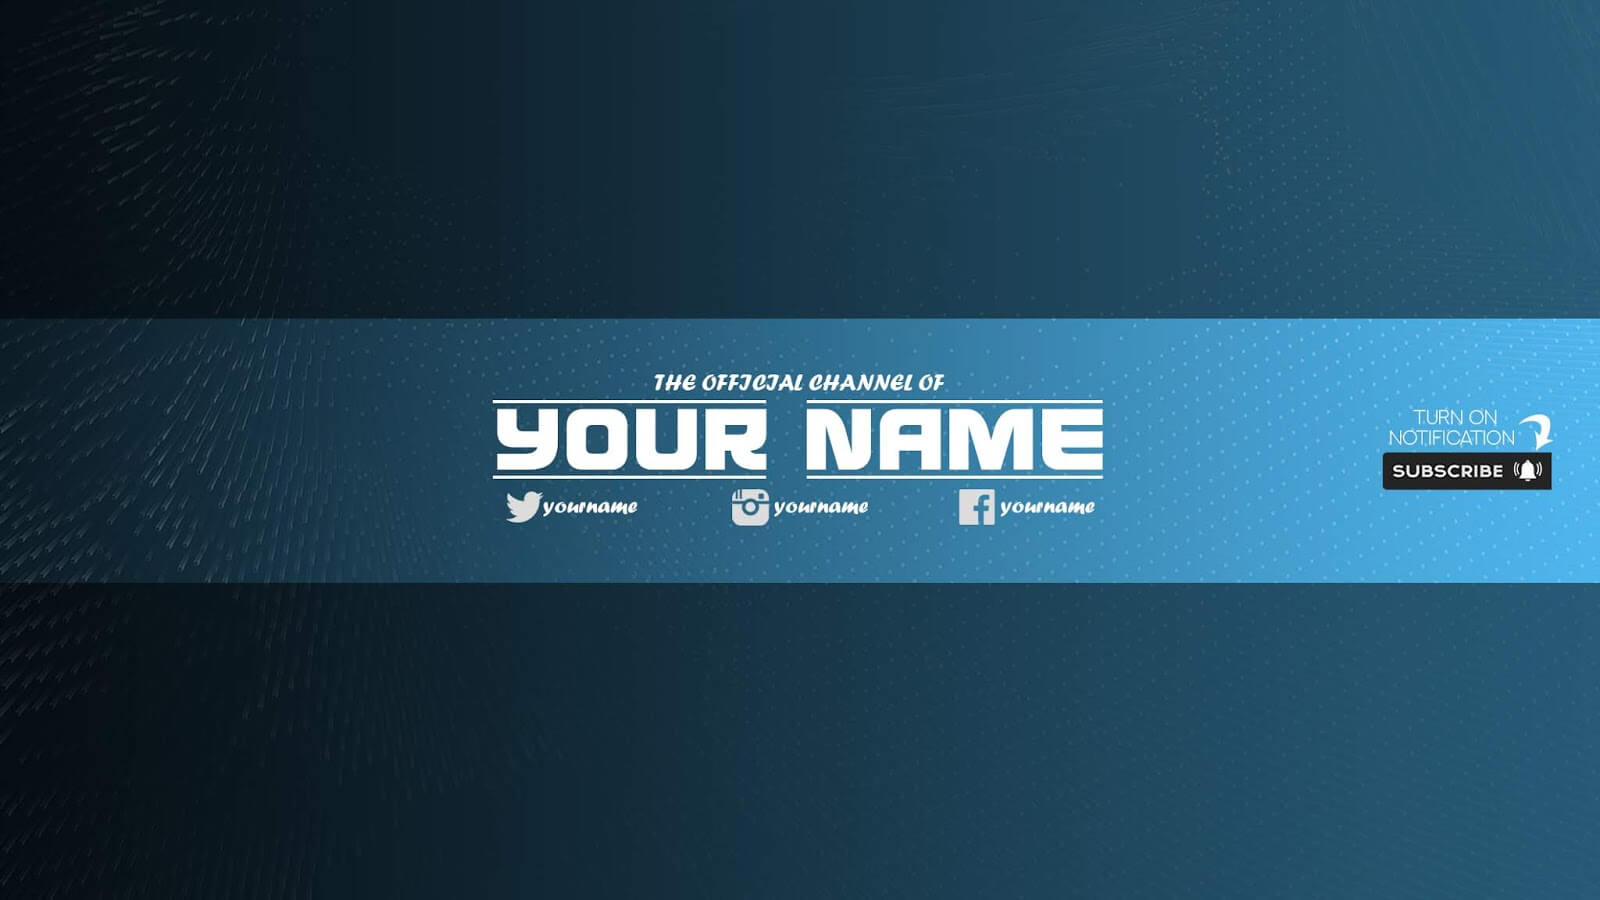 Youtube Banners Template